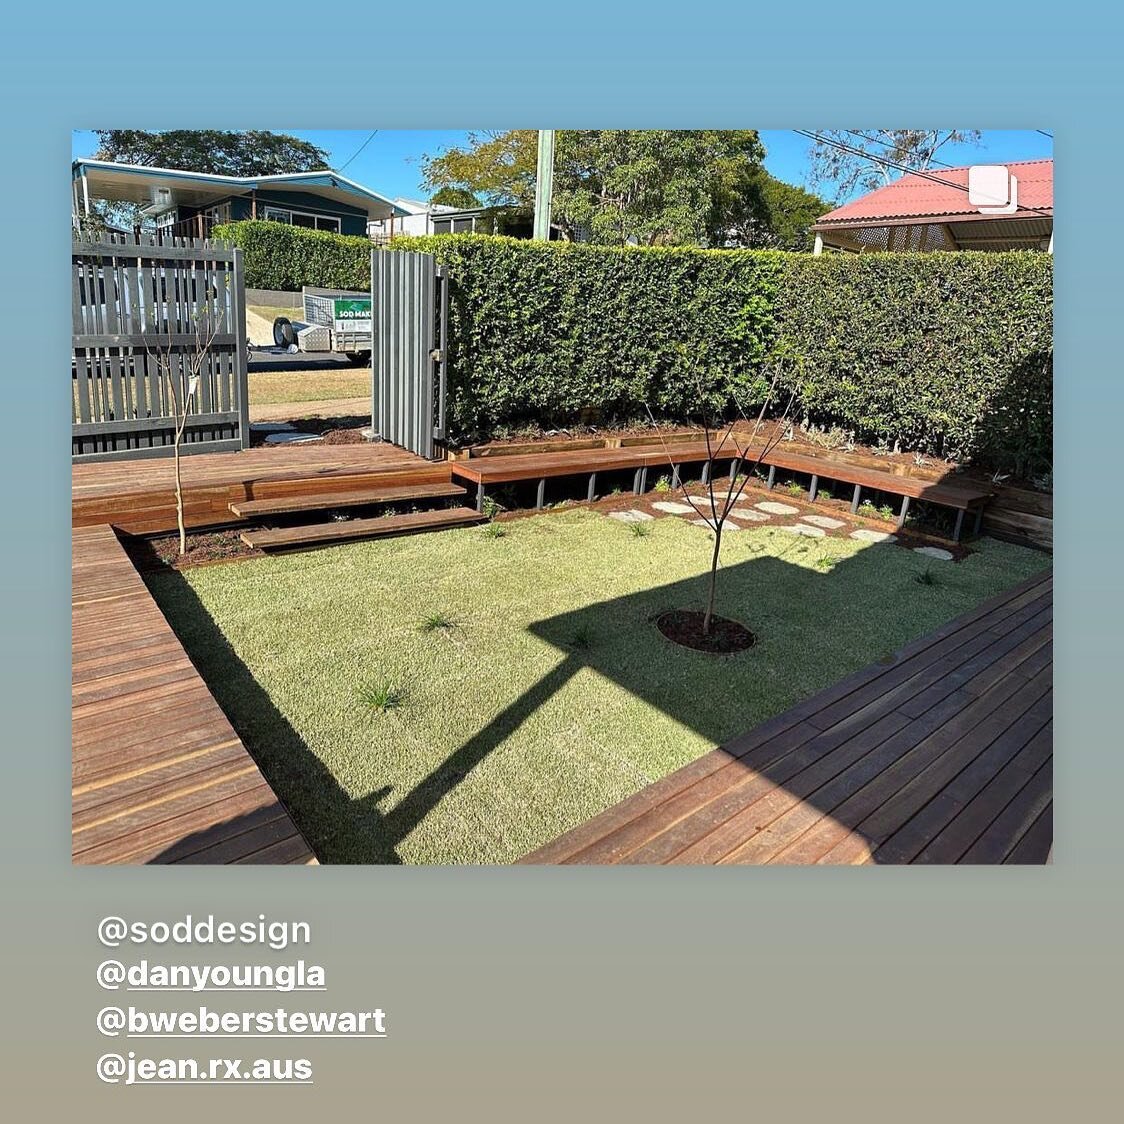 A small project to resolve some drainage/shading/general amenity issues for this east facing front yard:

Built in bench seating;
Moveable bench seating;
Replacing and modifying some existing decking areas;
Restrained planting palette (😱)

Mt Gravat